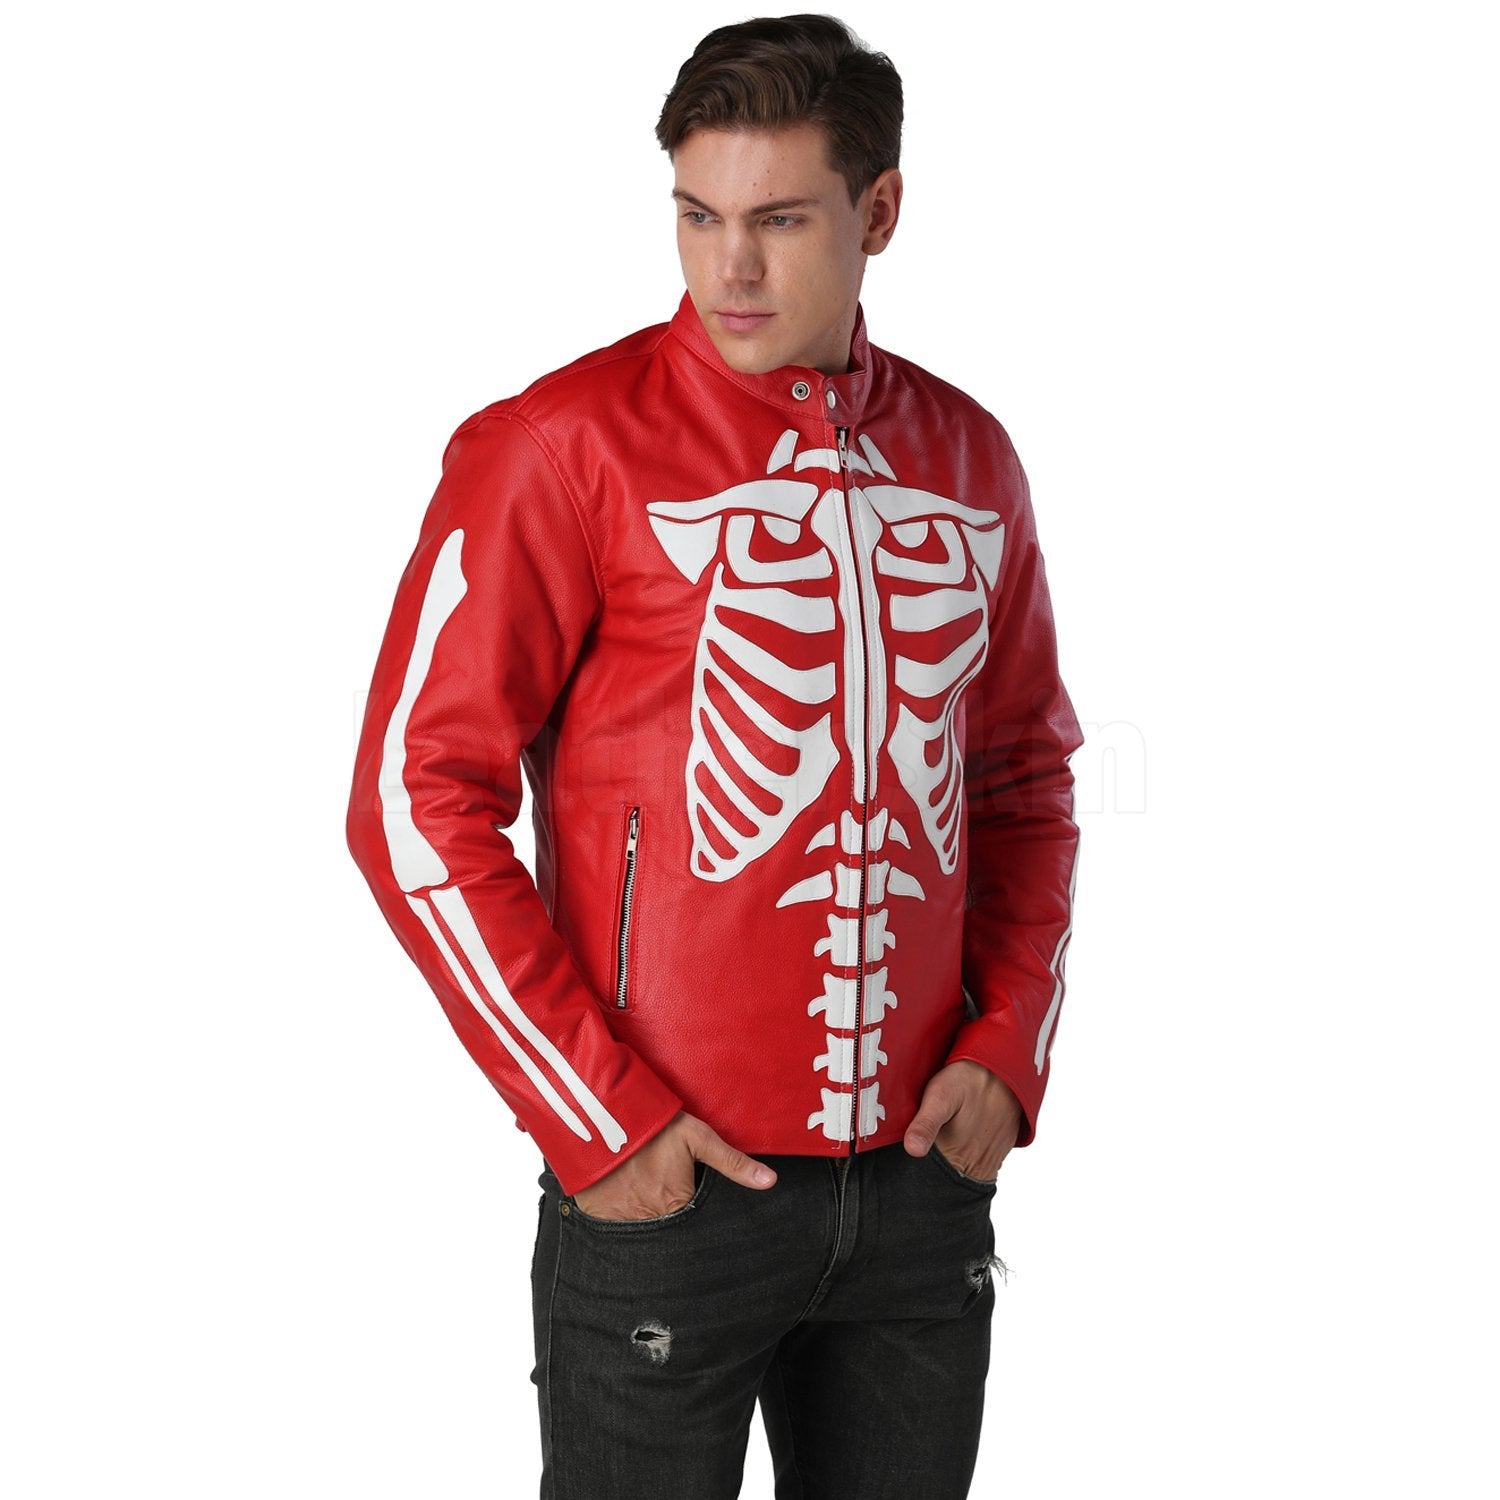 Red Motorcycle Leather Jacket with white skeleton